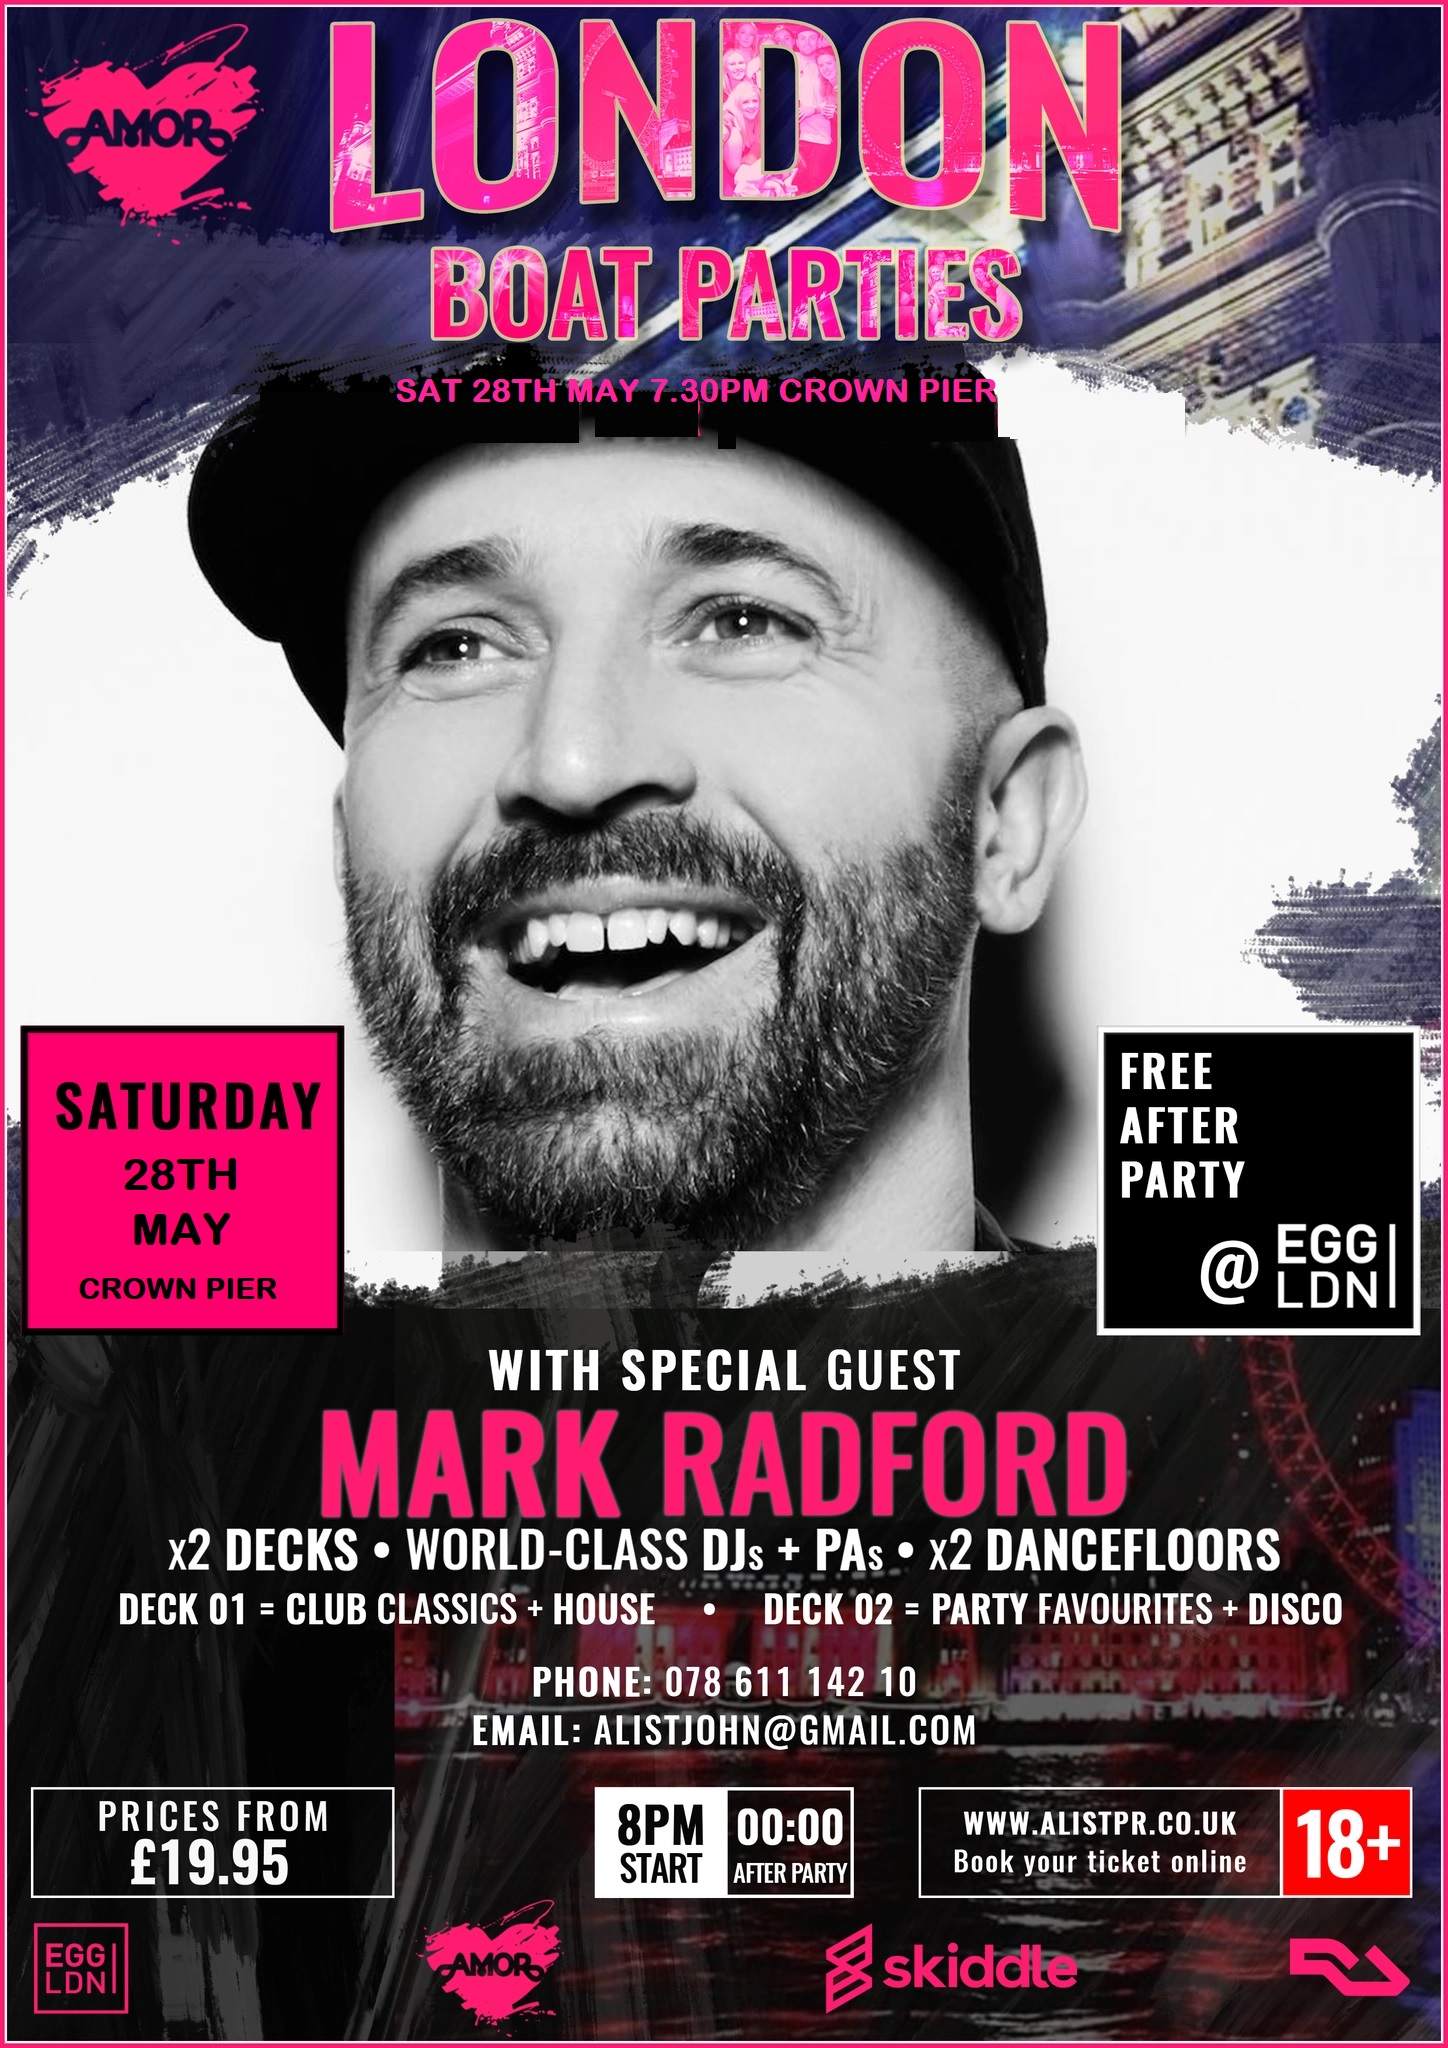 Amor Sunset Cruise Boat party w/ Mark Radford + free after party (worth £20) - フライヤー裏